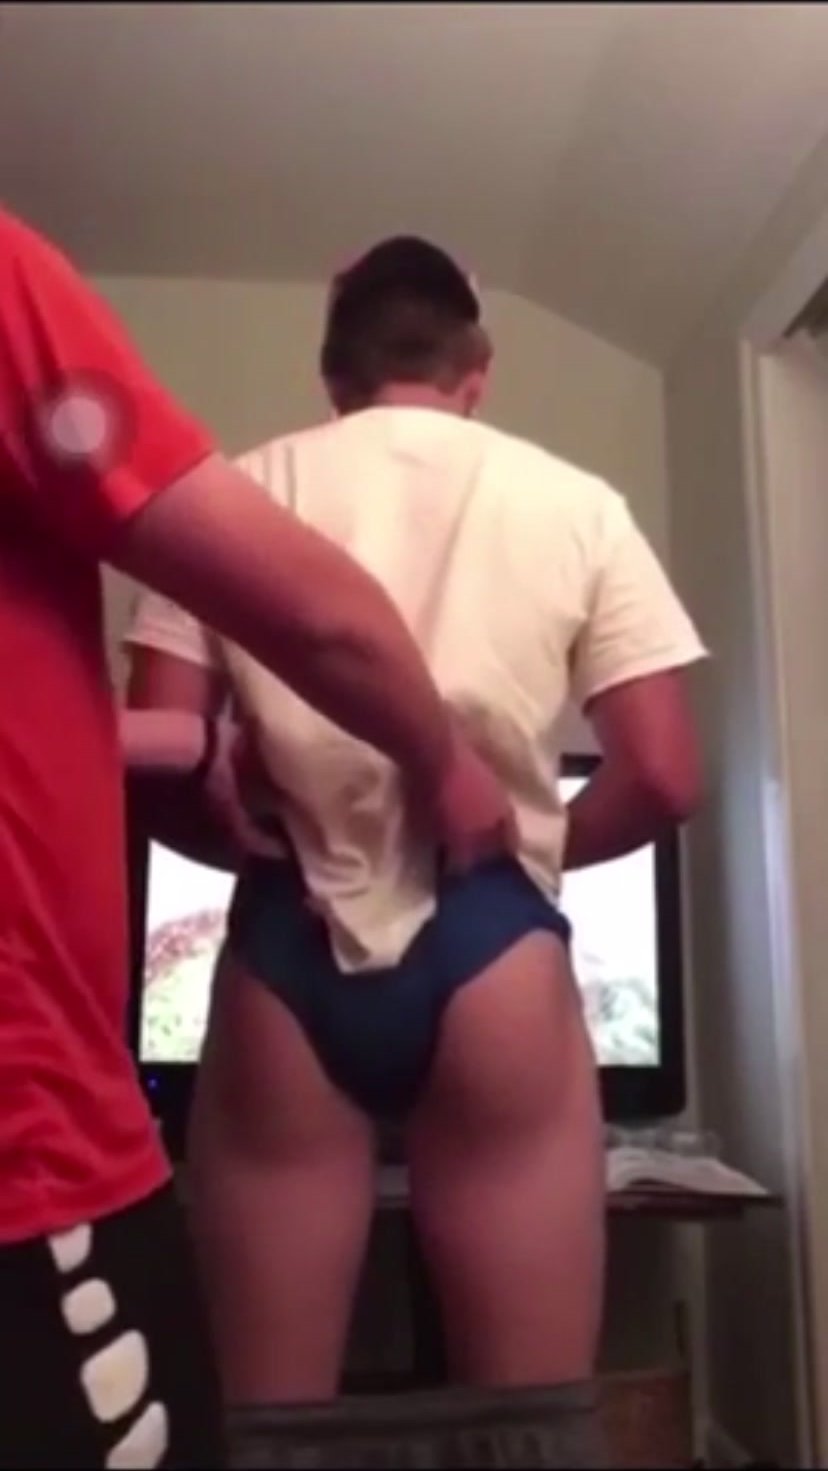 Hot guy gets wedgied